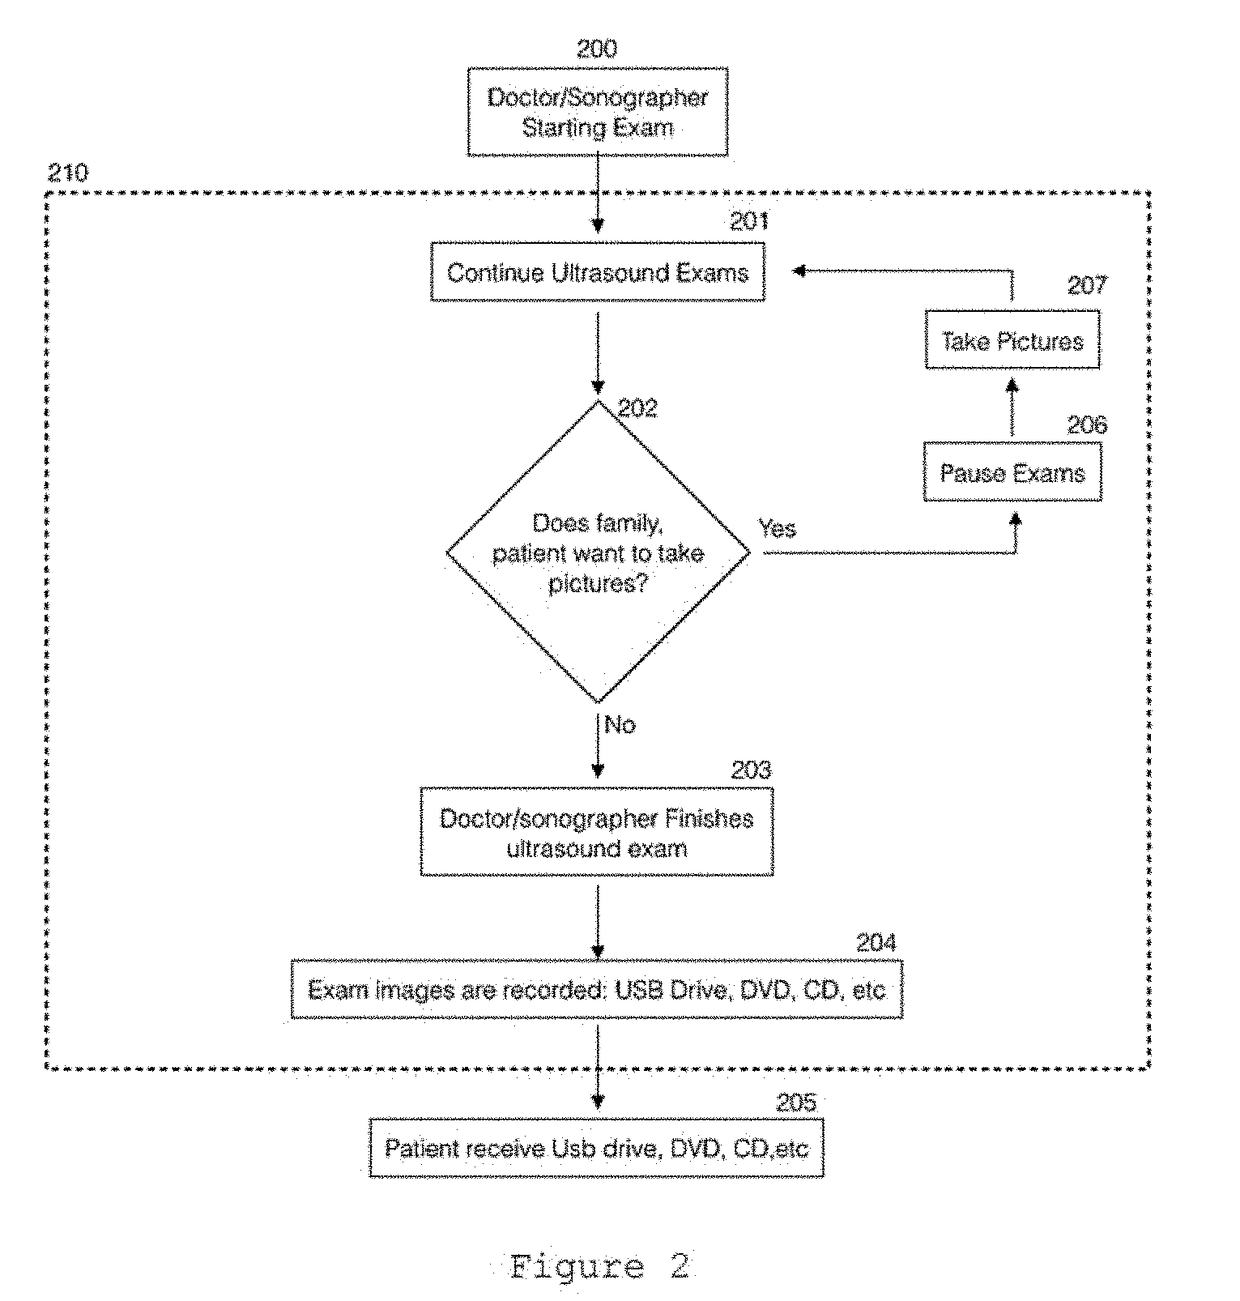 Method for sharing patient pregnancy data during ultrasound